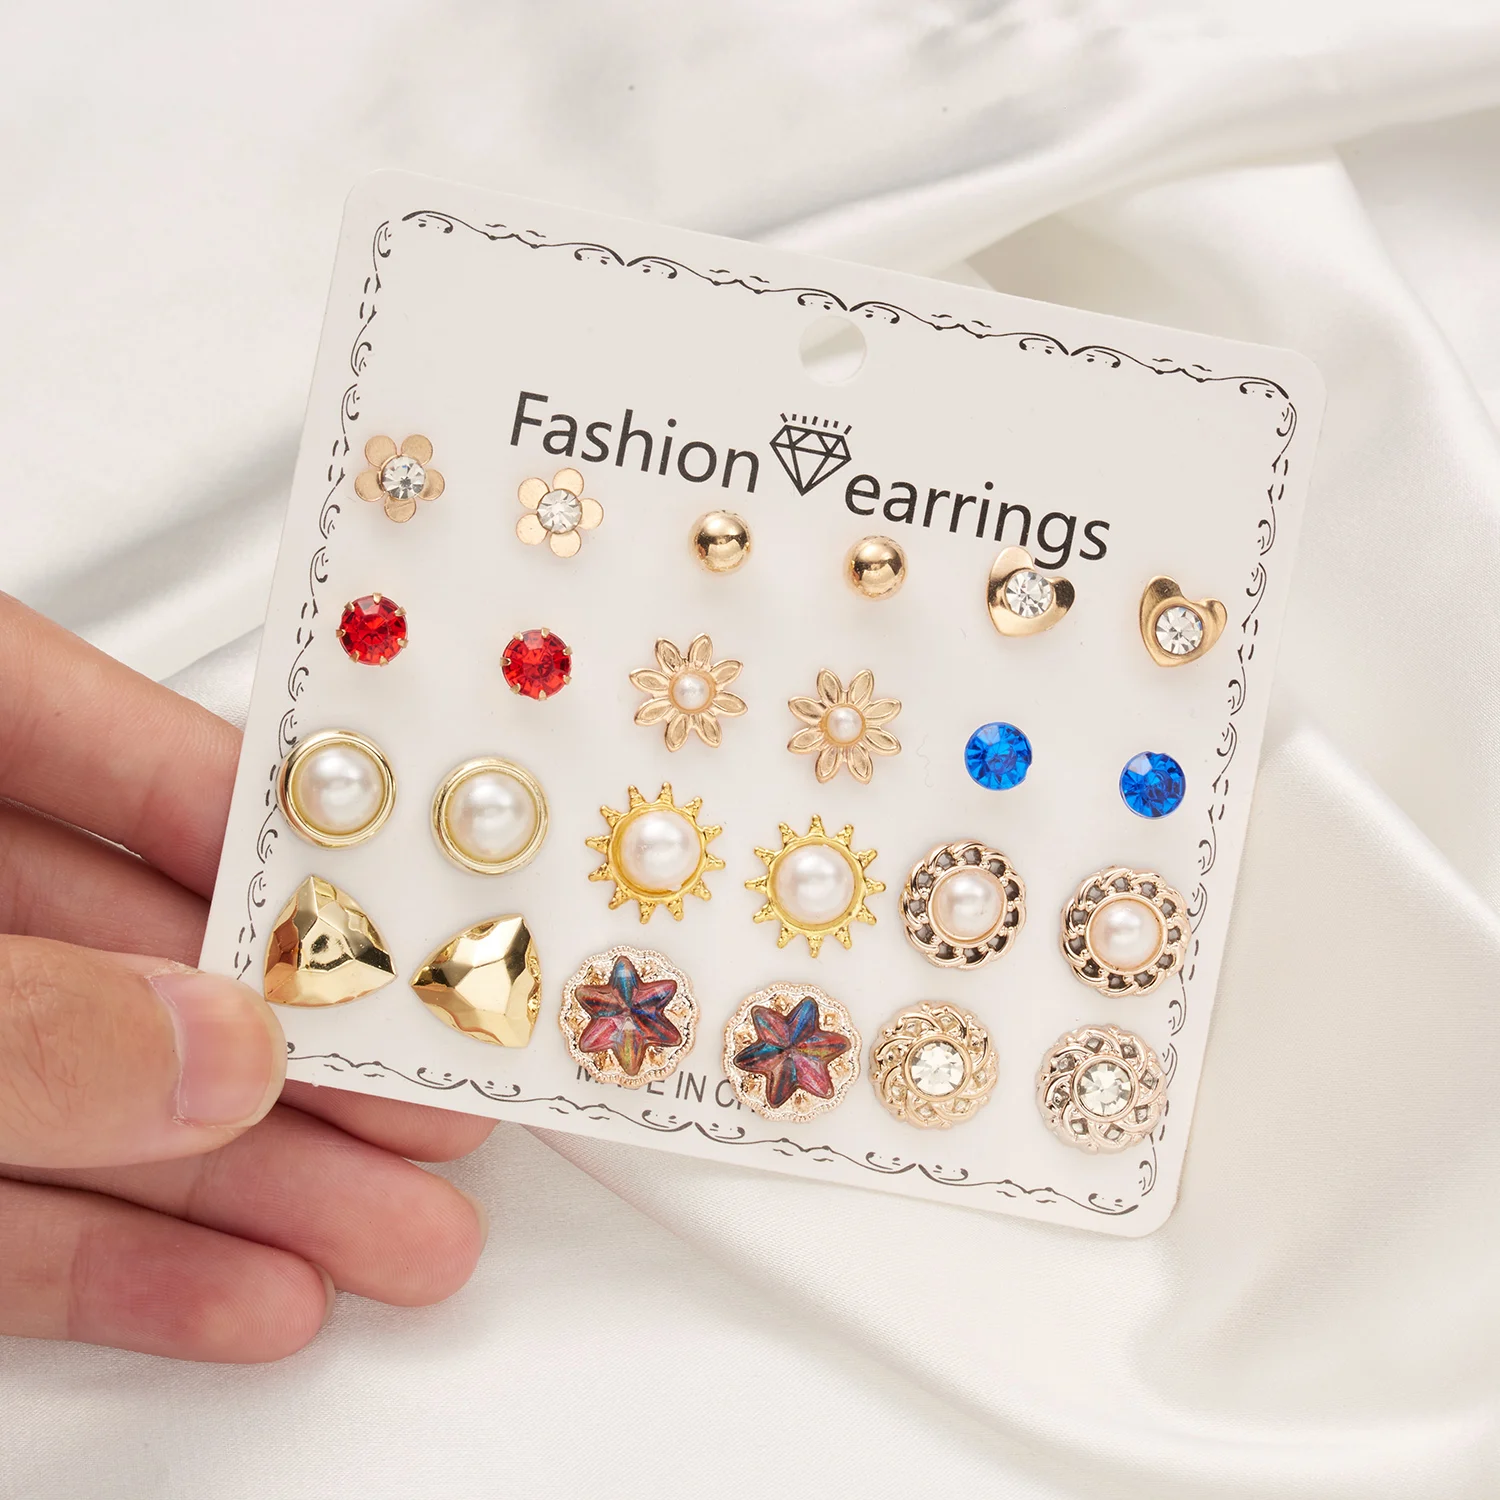 

2021 New Wholesale Fashion Jewelry 12 Pairs Stud Earring Set Gold Plated Cubic Zircon Diamond Pearl Earrings For Women, Picture shows